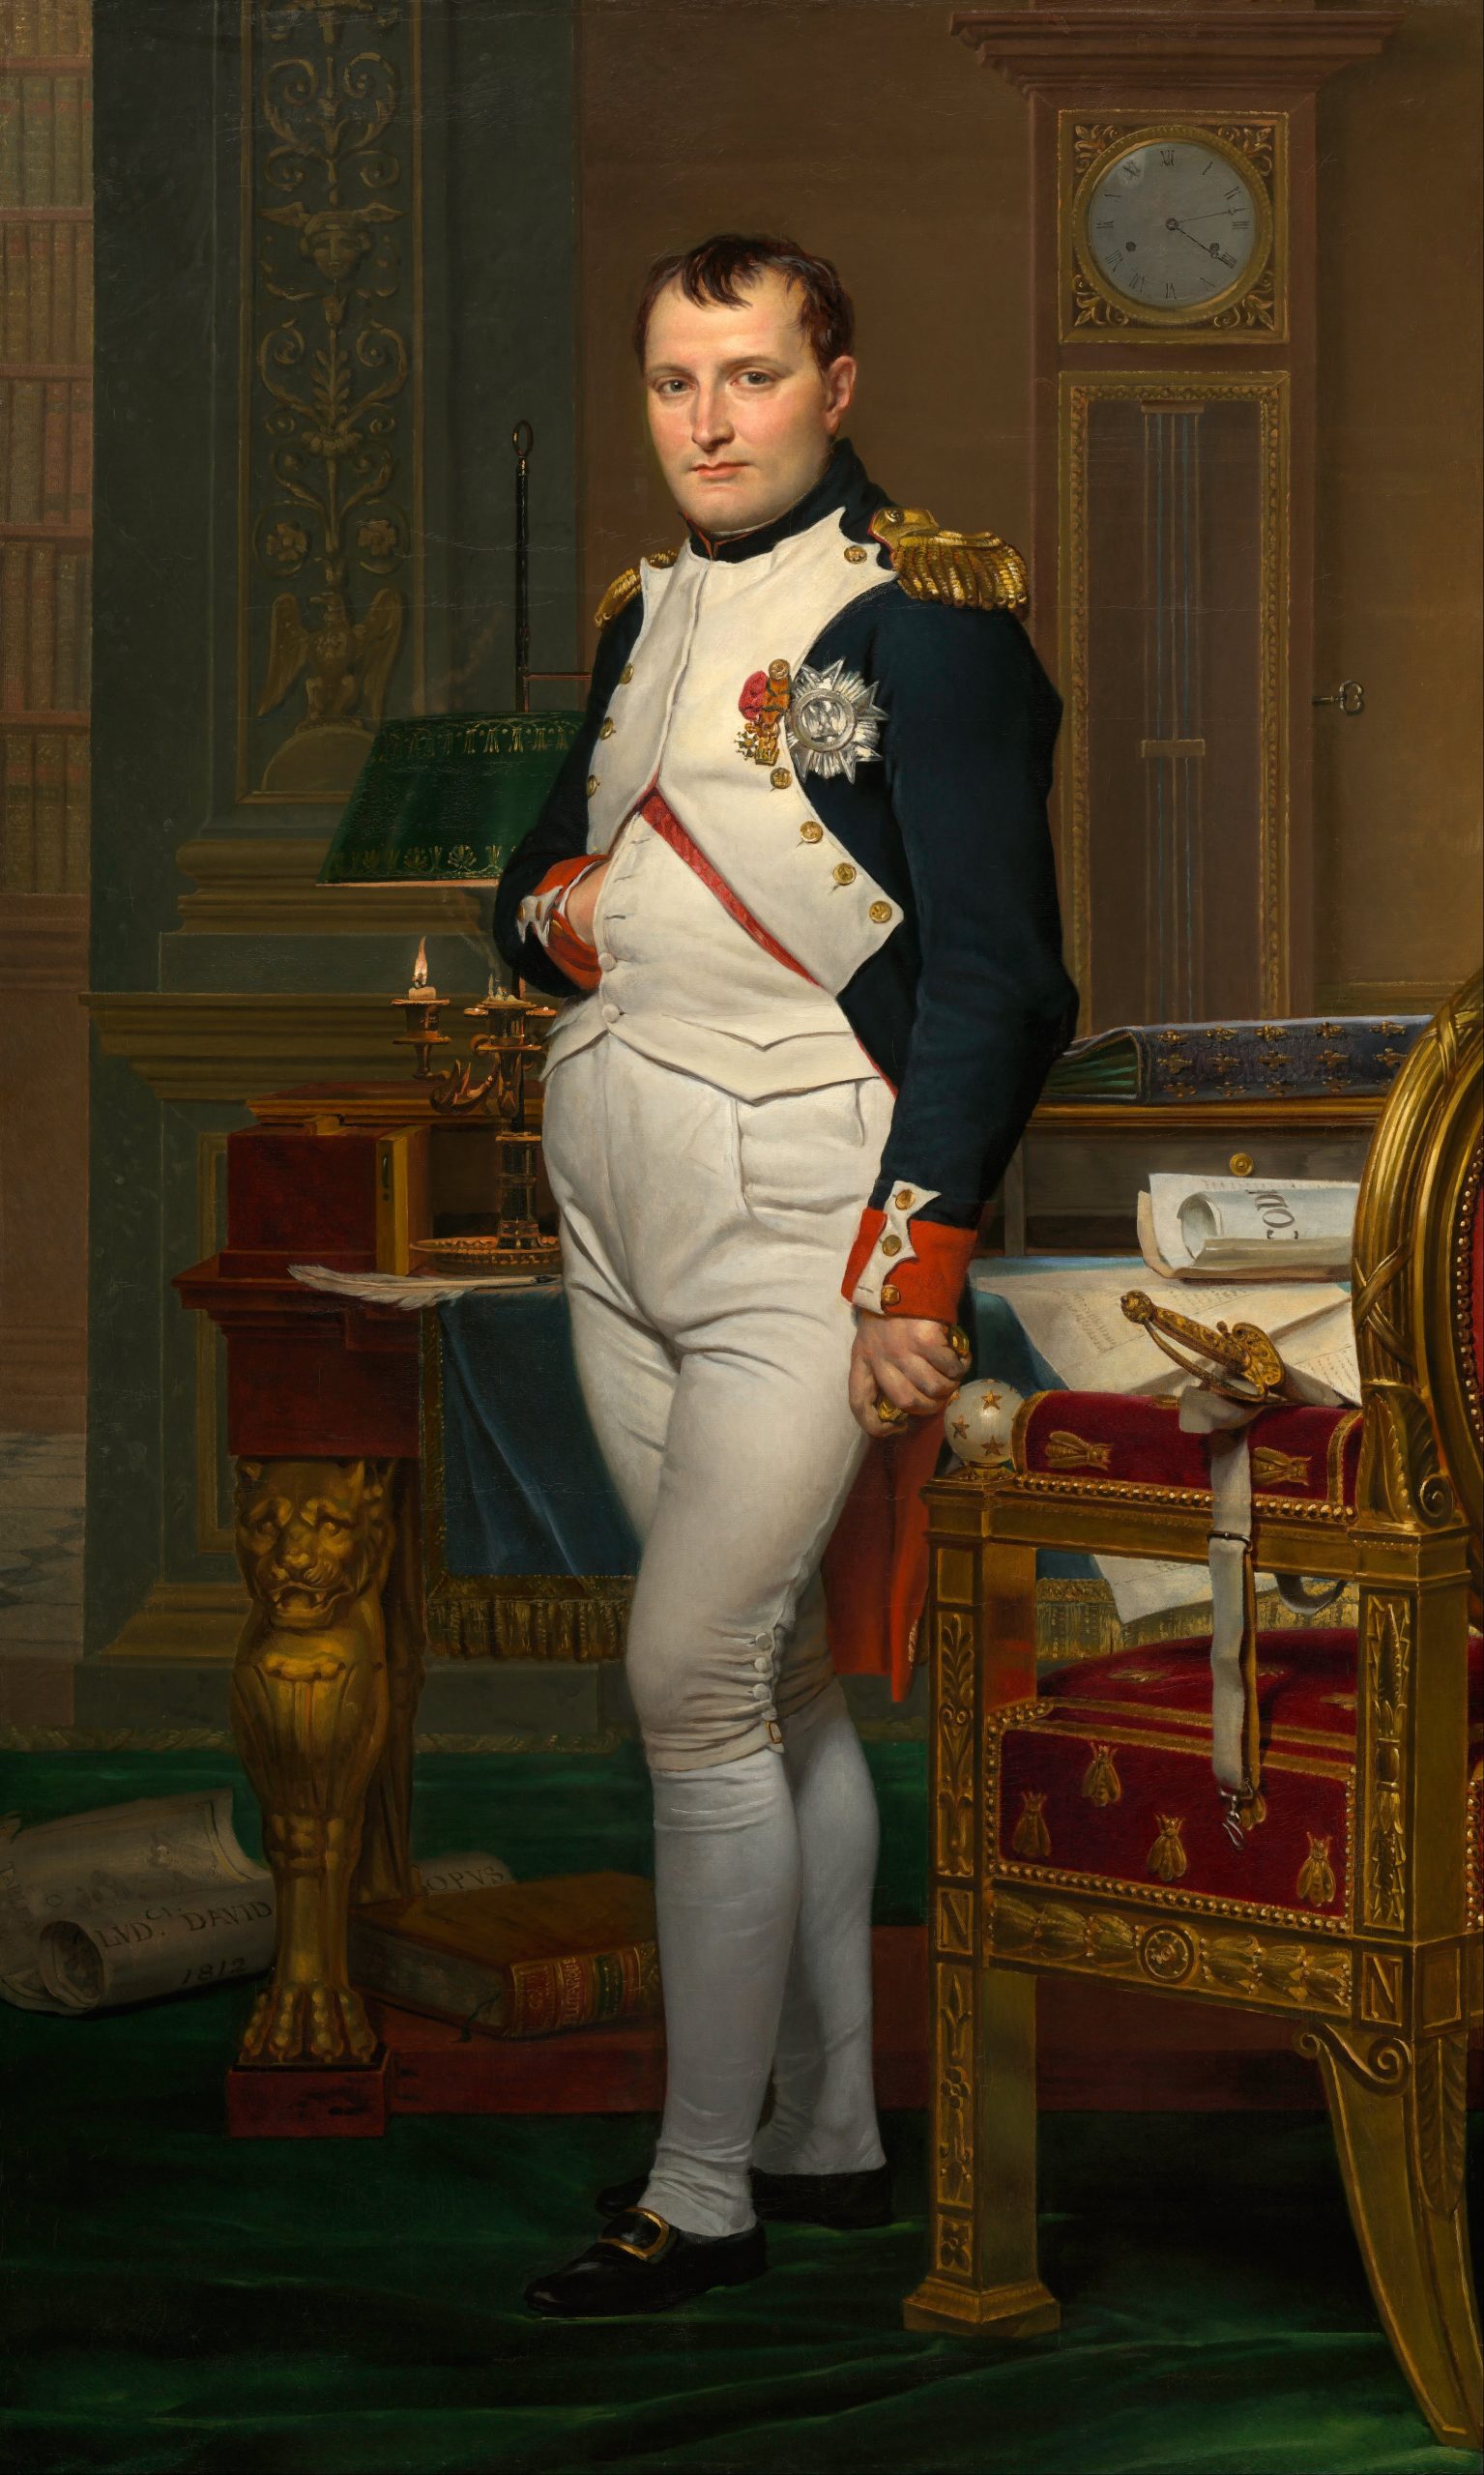 The portrait has the power to immortalize people and moments in time as depicted in this famous portrait of Napoleon, The Emperor Napoleon in His Study at the Tuileries, 1812 by Jacques-Louis David.